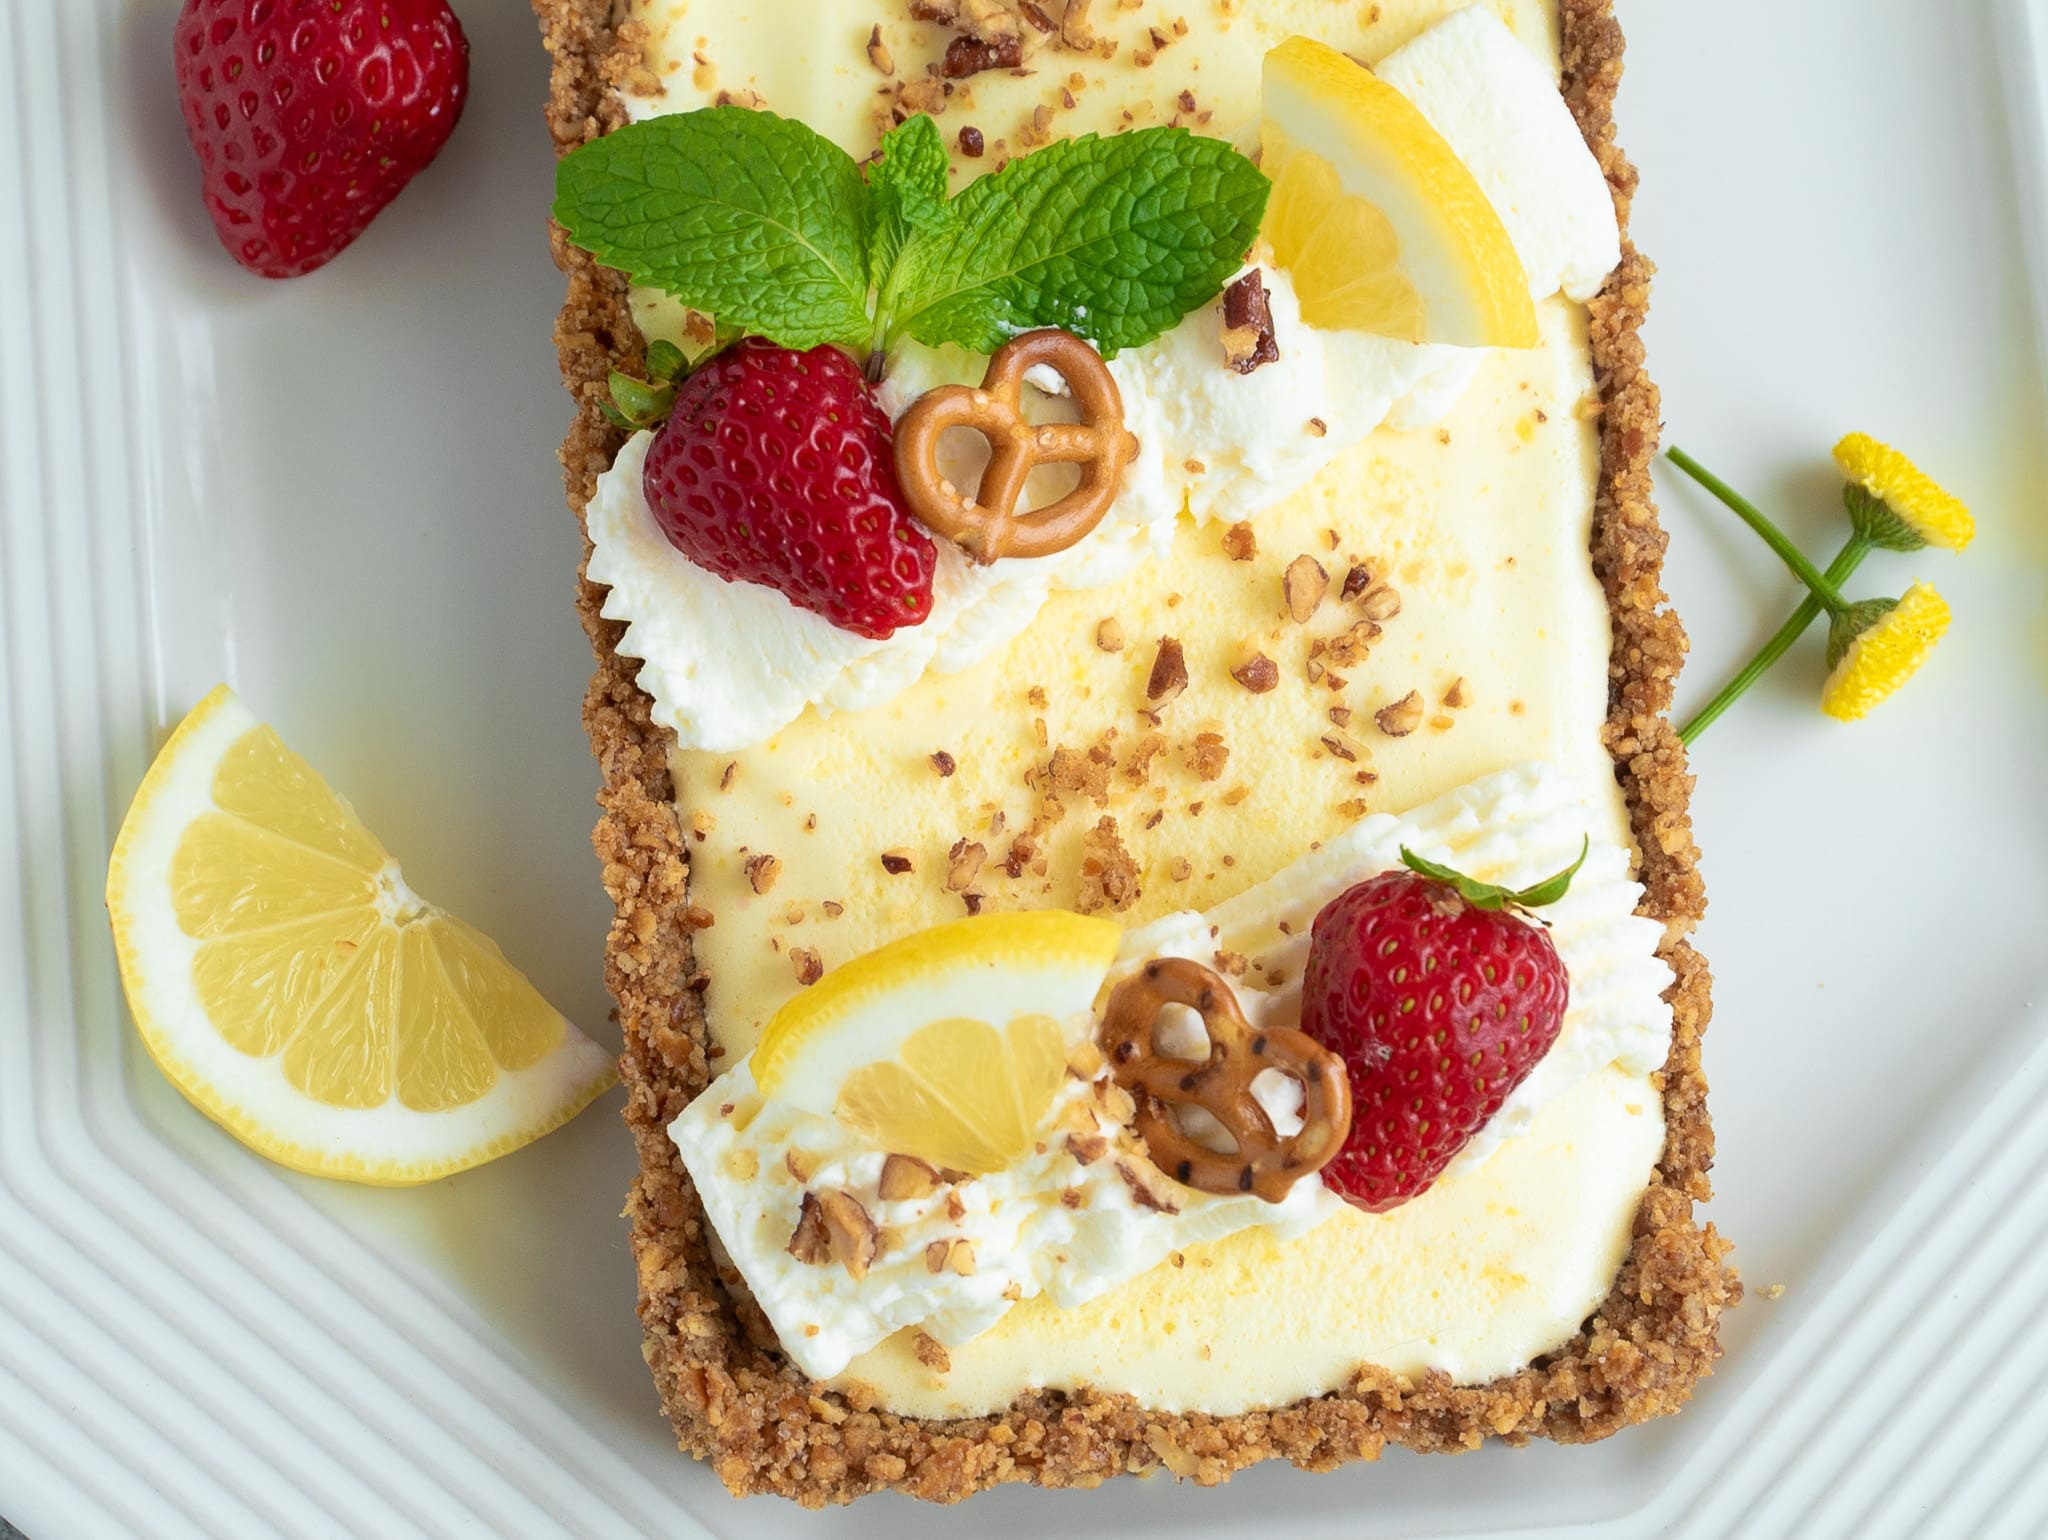 Lemon Rectangular Tart with Strawberries and garnished with Lemon slices and mint